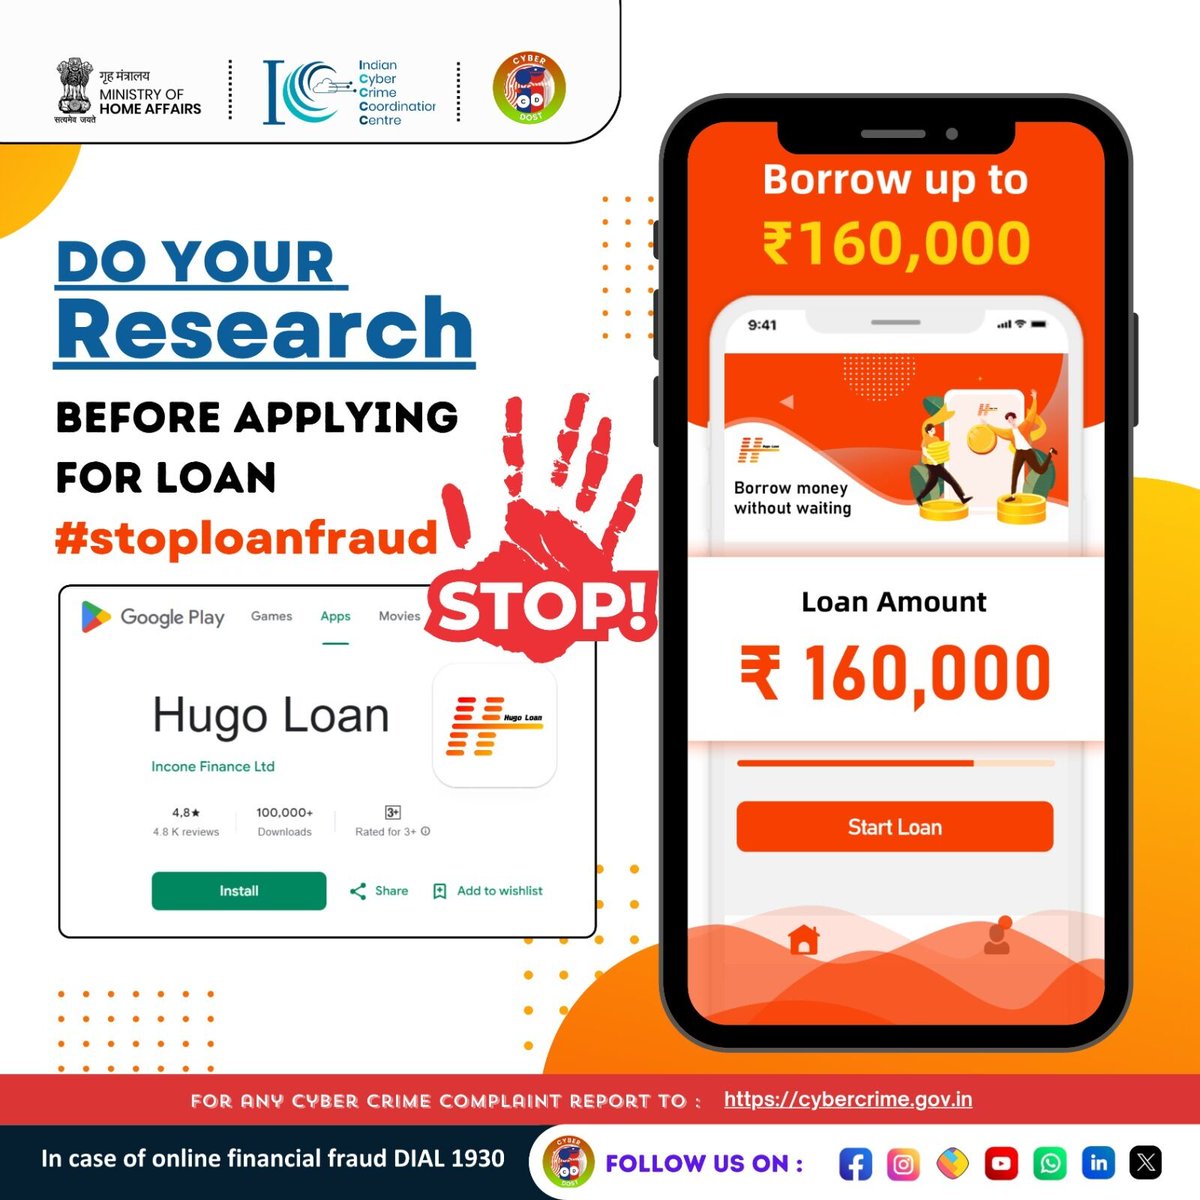 Don’t get lured by quick cash! Stay vigilant against fake loan apps. #CyberSmart #FraudAlert #StaySafeOnline #CyberSafeIndia #CyberAware #StayCyberWise #I4C #MHA #fraud #newsfeed